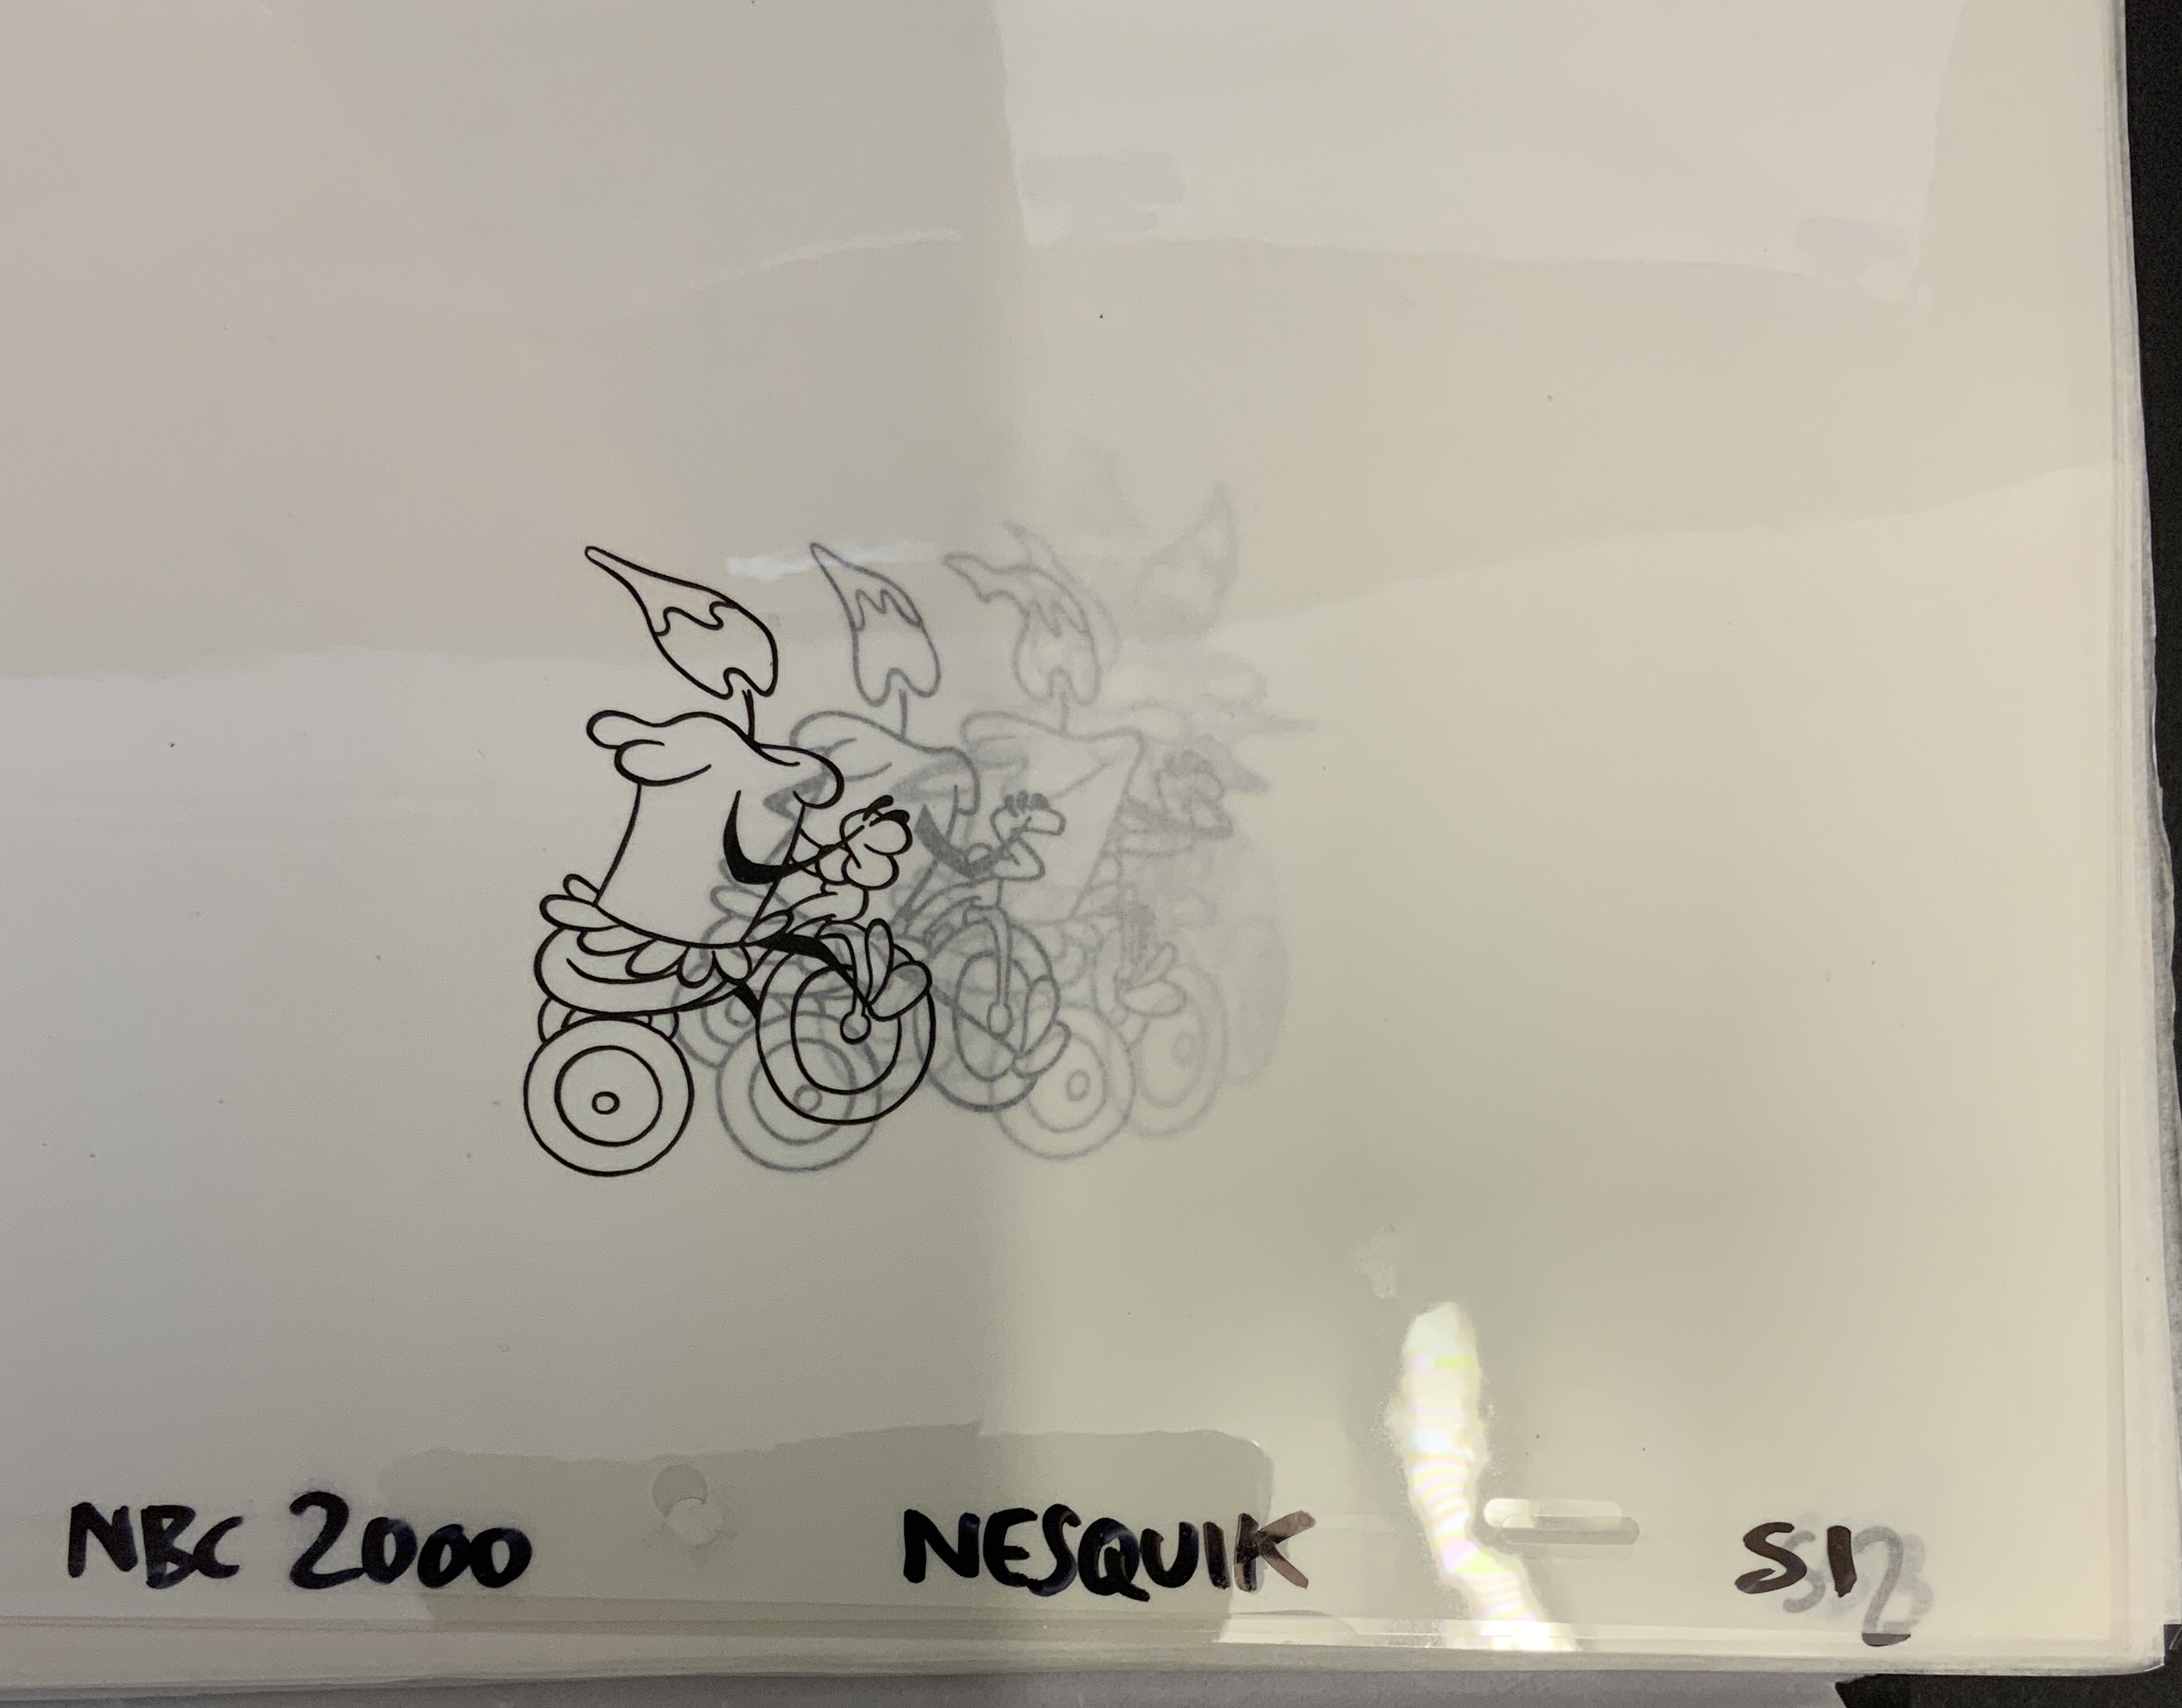 CARTOON NETWORK GROUP OF NESQUIK - NBC 2000 CARTOON ANIMATION DRAWINGS SKETCHES - PART1